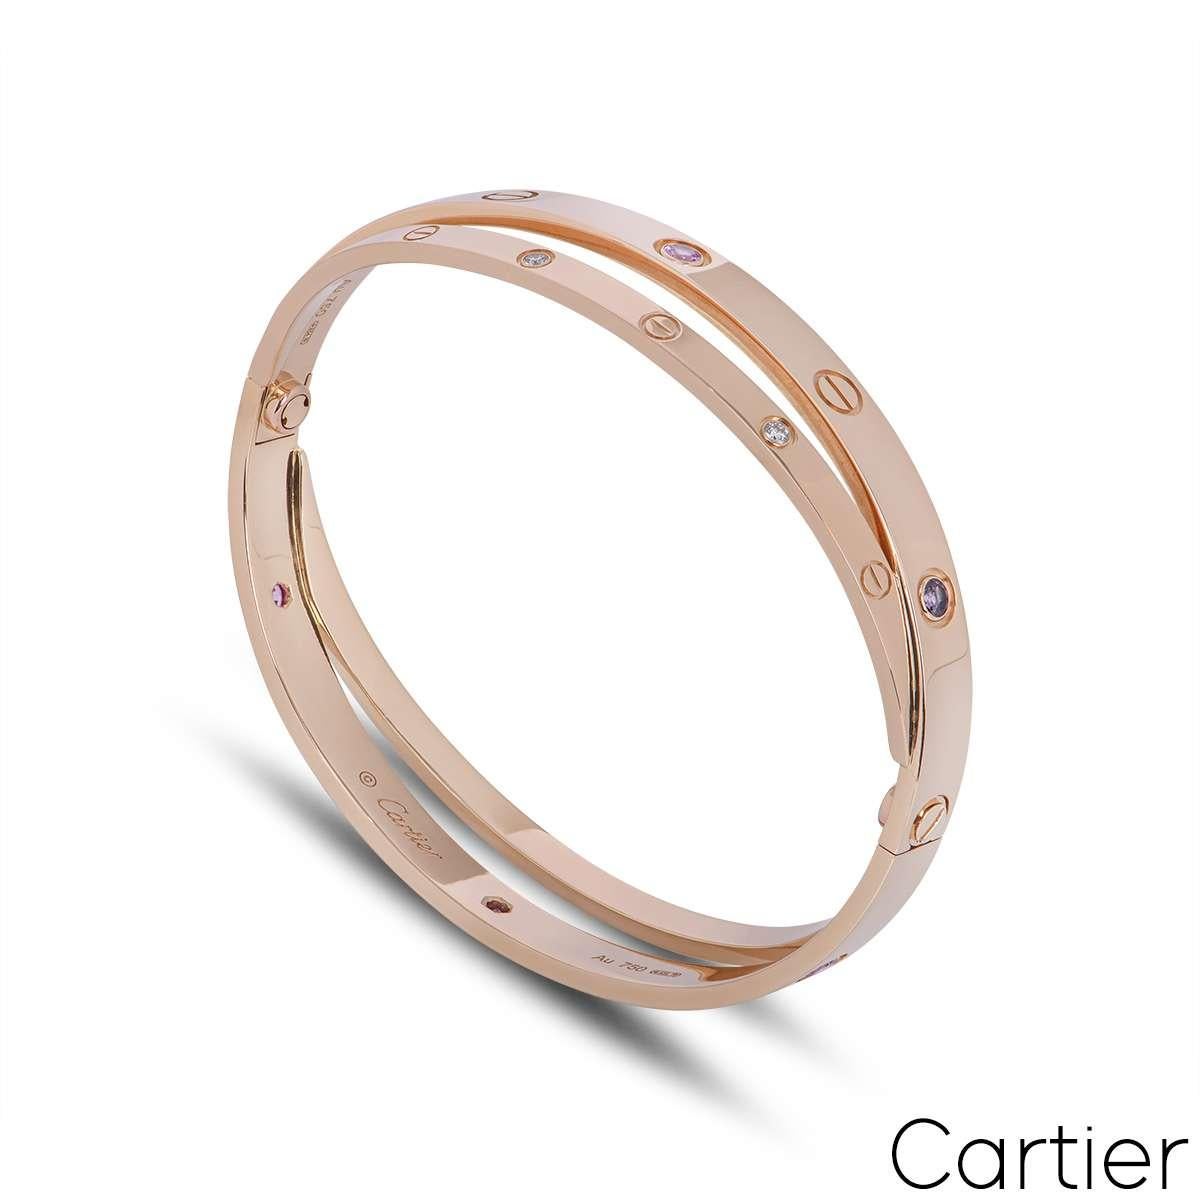 An iconic 18k rose gold half diamond and pink sapphire double Cartier bracelet from the Love collection. The double bangle features the iconic screw motif alternating with 6 round brilliant cut diamonds and 6 pink sapphires displayed around the